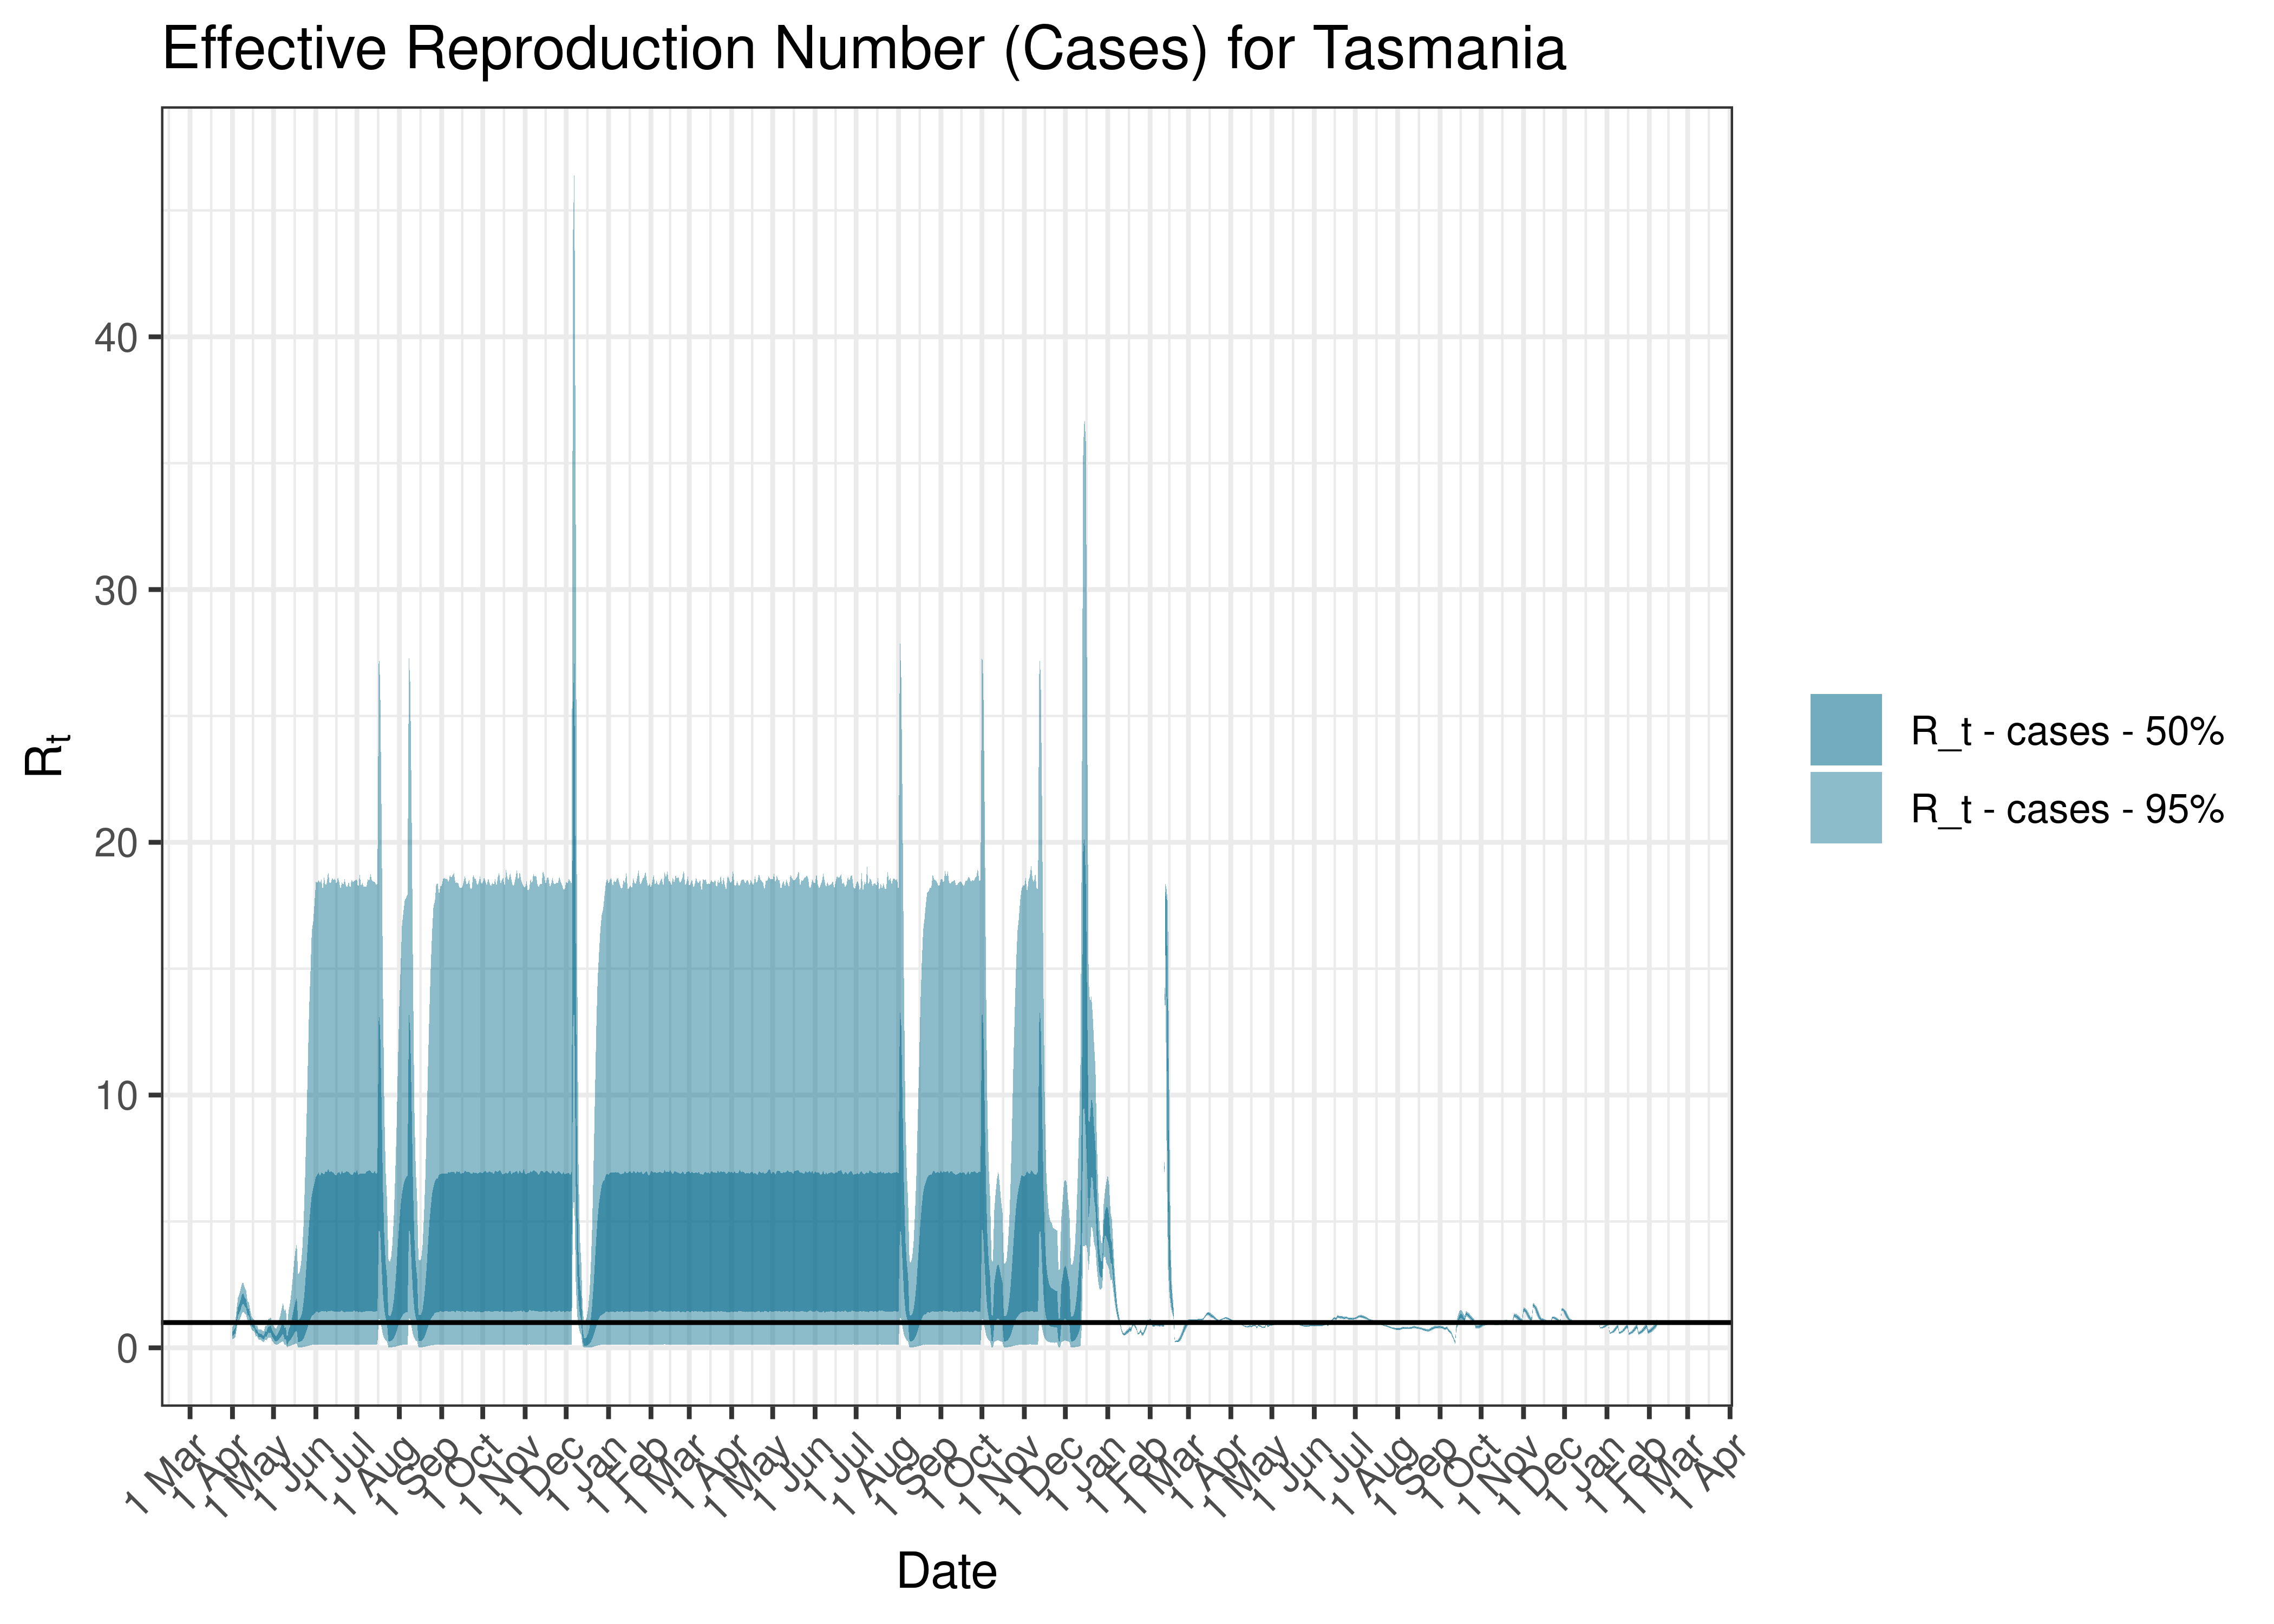 Estimated Effective Reproduction Number Based on Cases for Tasmania since 1 April 2020